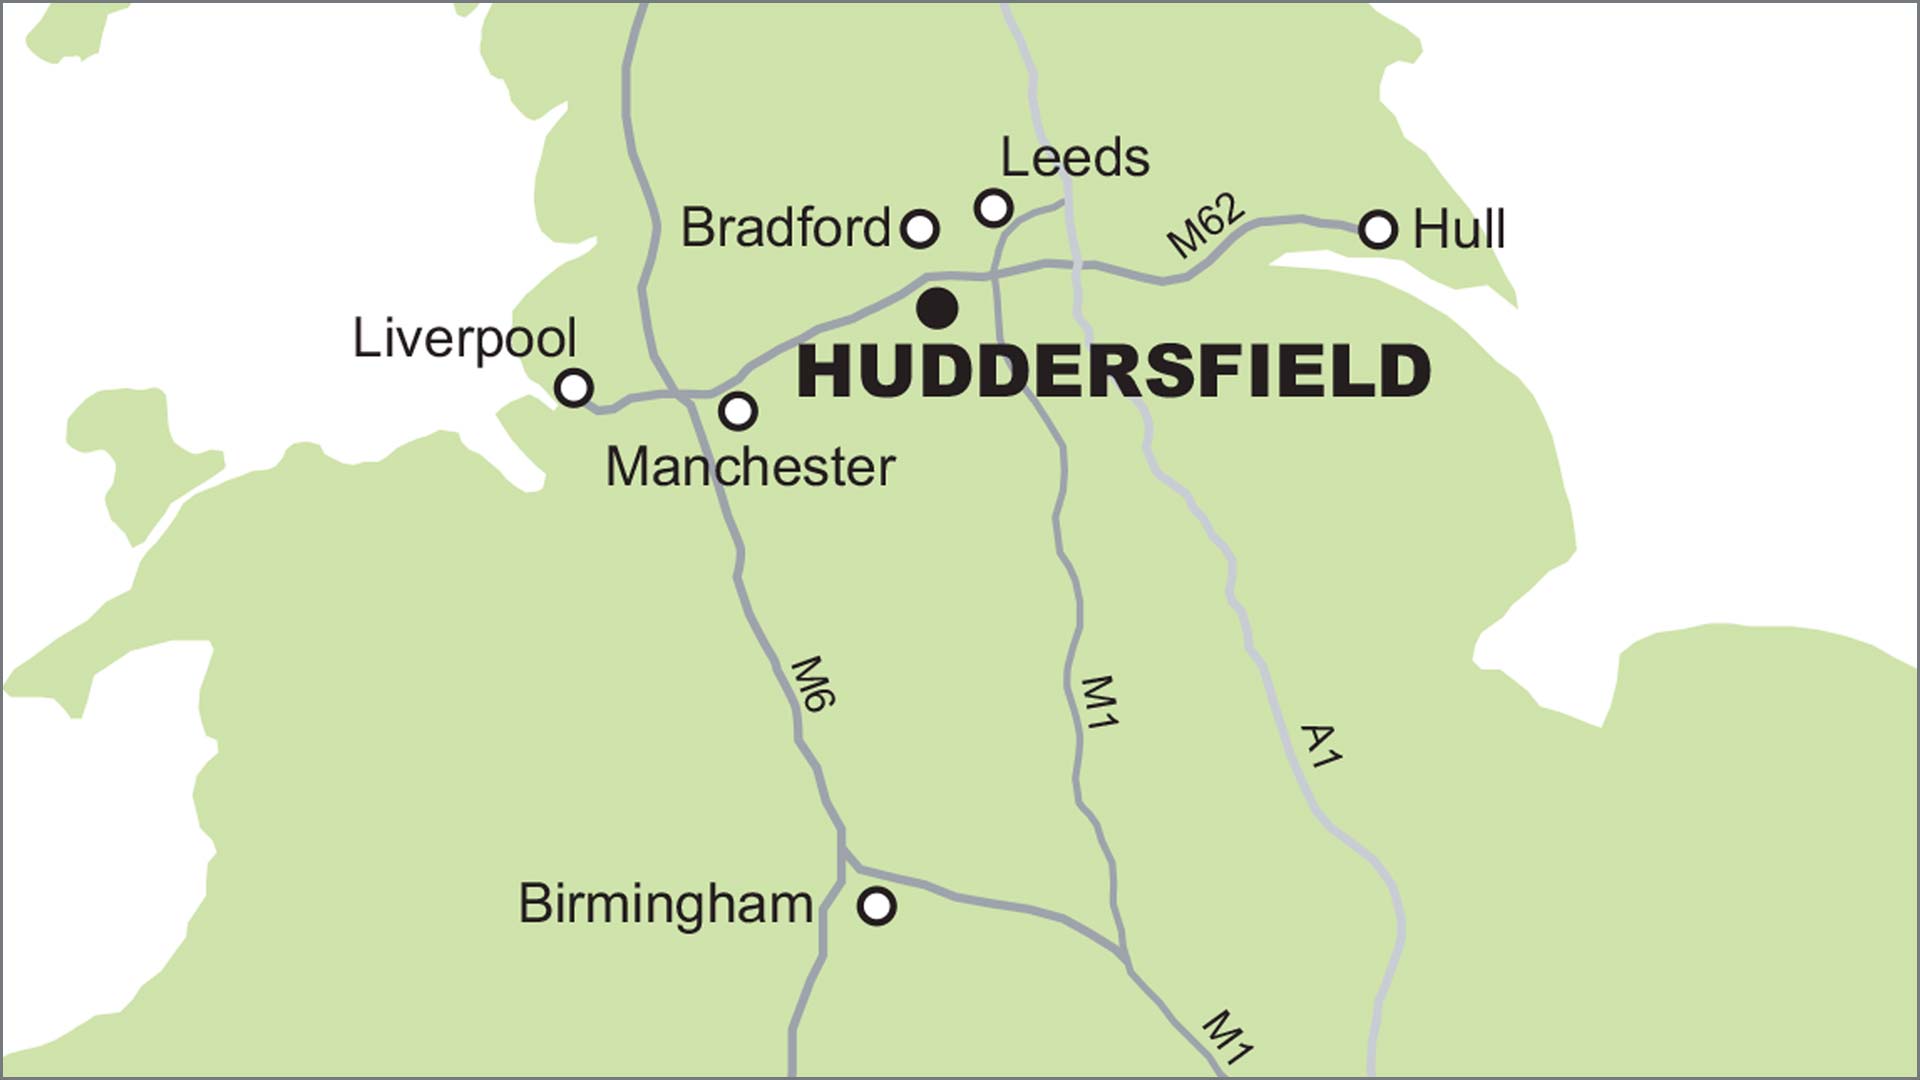 Map showing where Huddersfield is in relation to Leeds and Manchester.